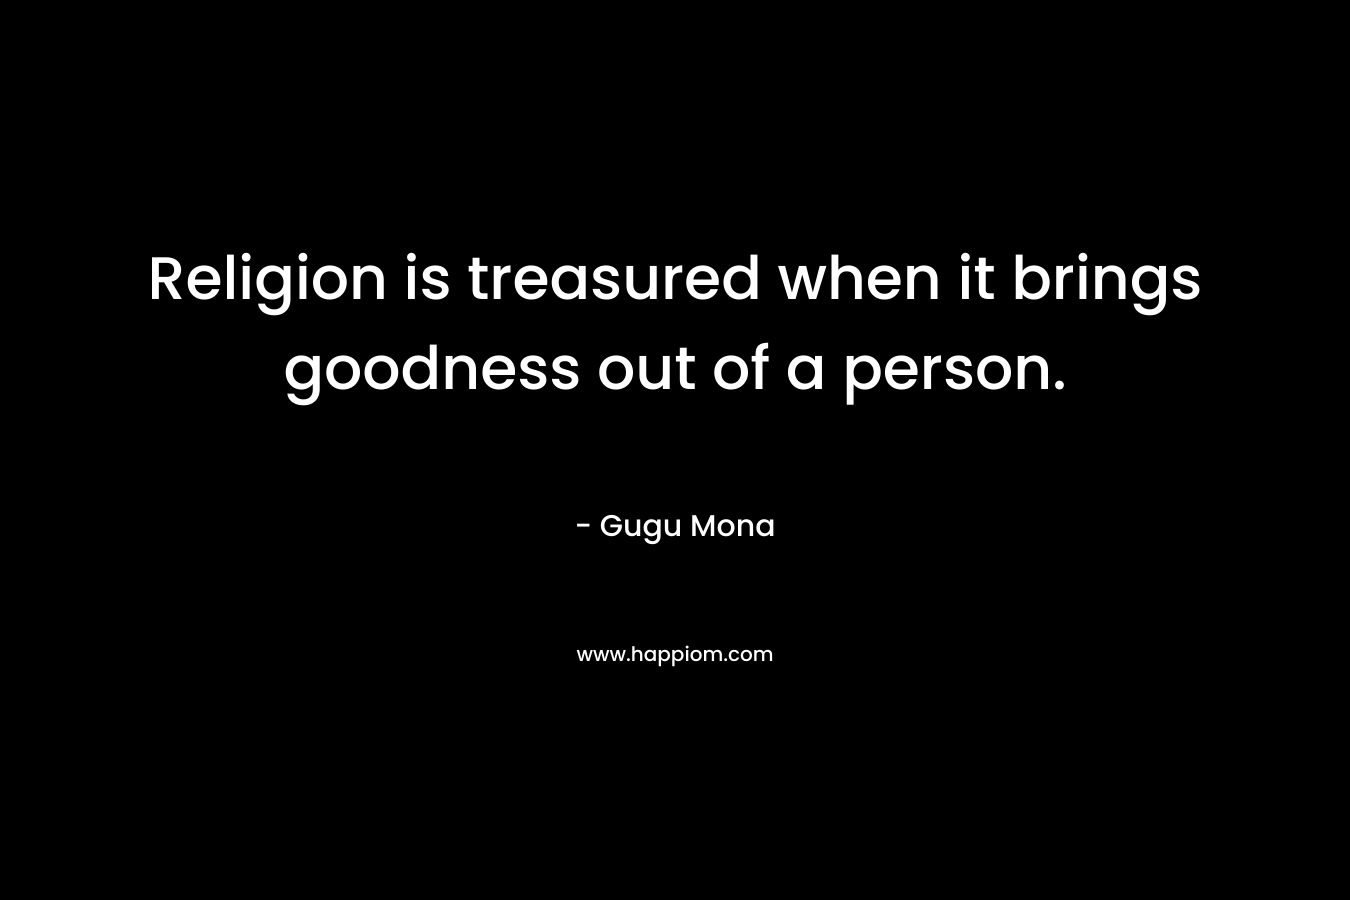 Religion is treasured when it brings goodness out of a person. – Gugu Mona